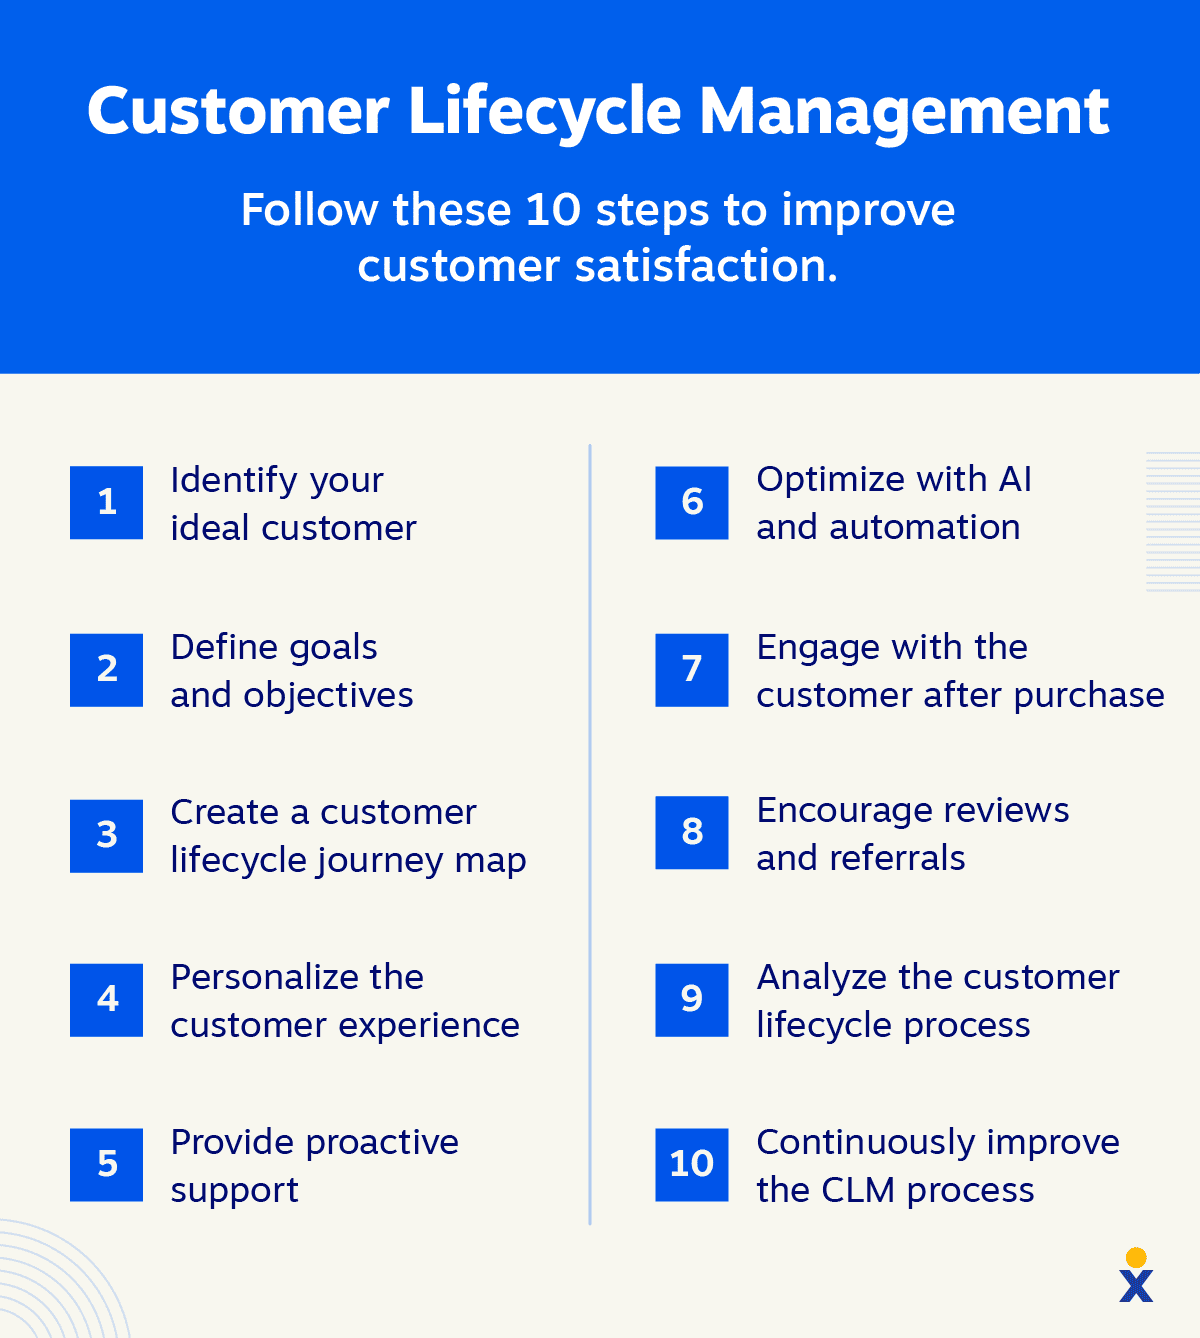 10 steps to Manage the Customer Lifecycle
